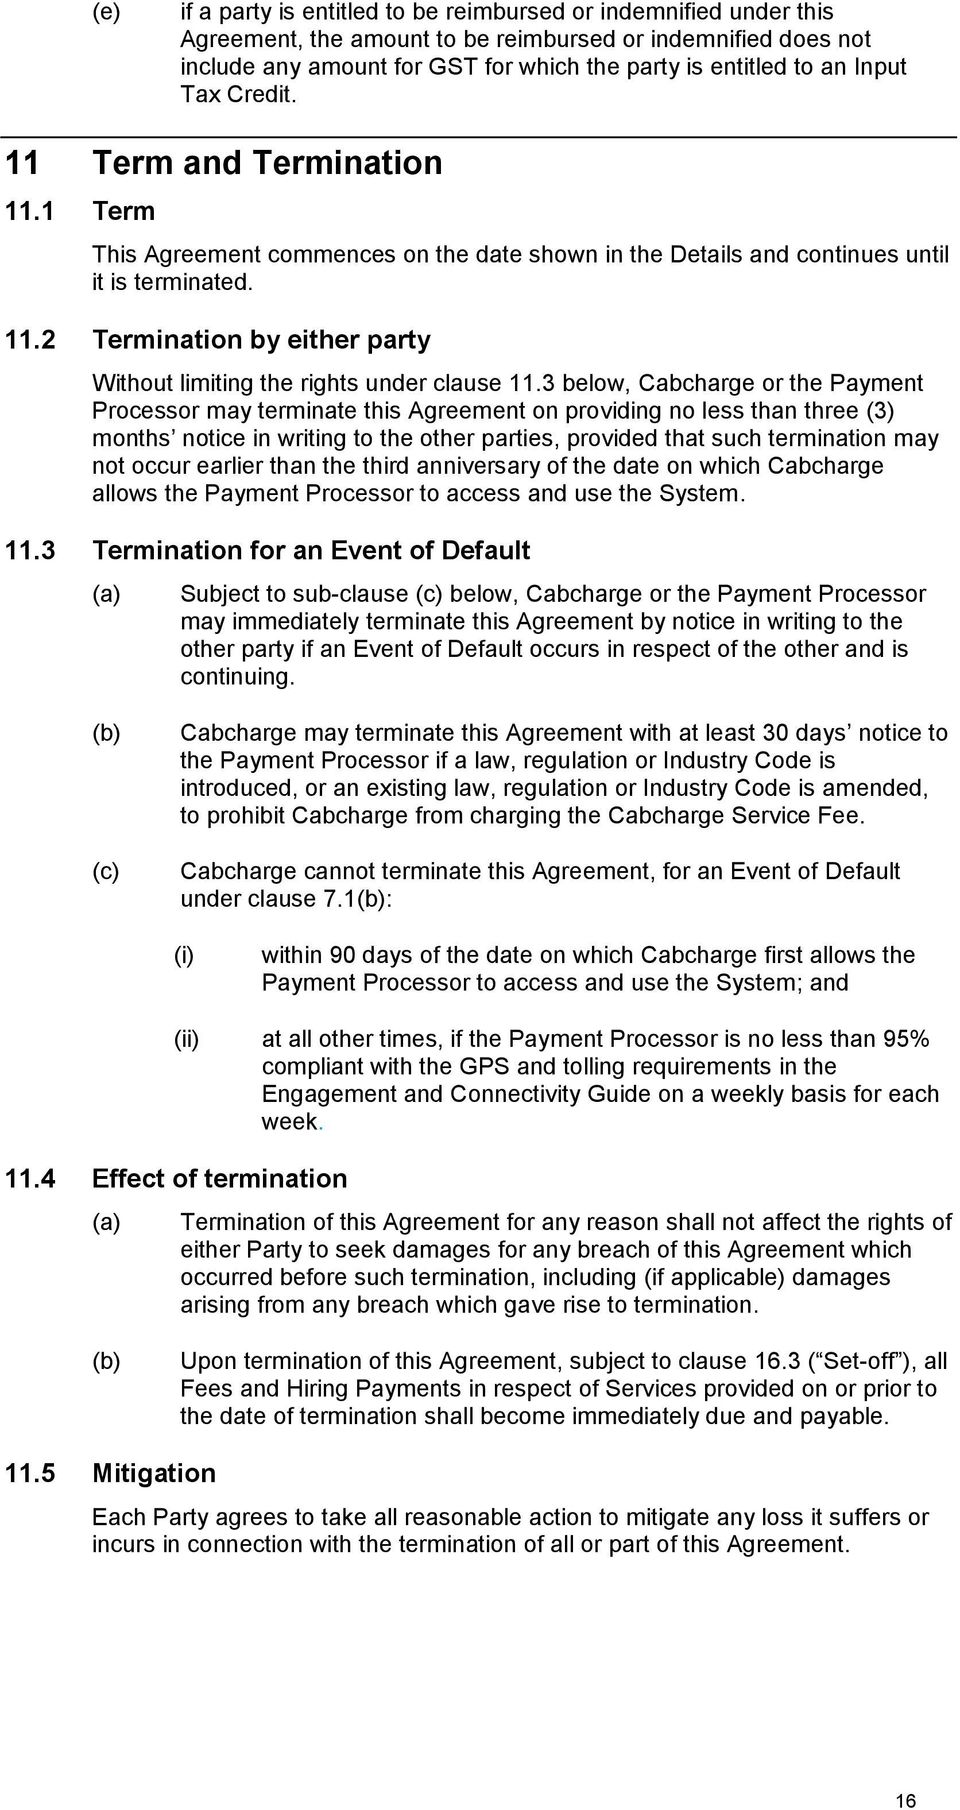 3 below, Cabcharge or the Payment Processor may terminate this Agreement on providing no less than three (3 months notice in writing to the other parties, provided that such termination may not occur